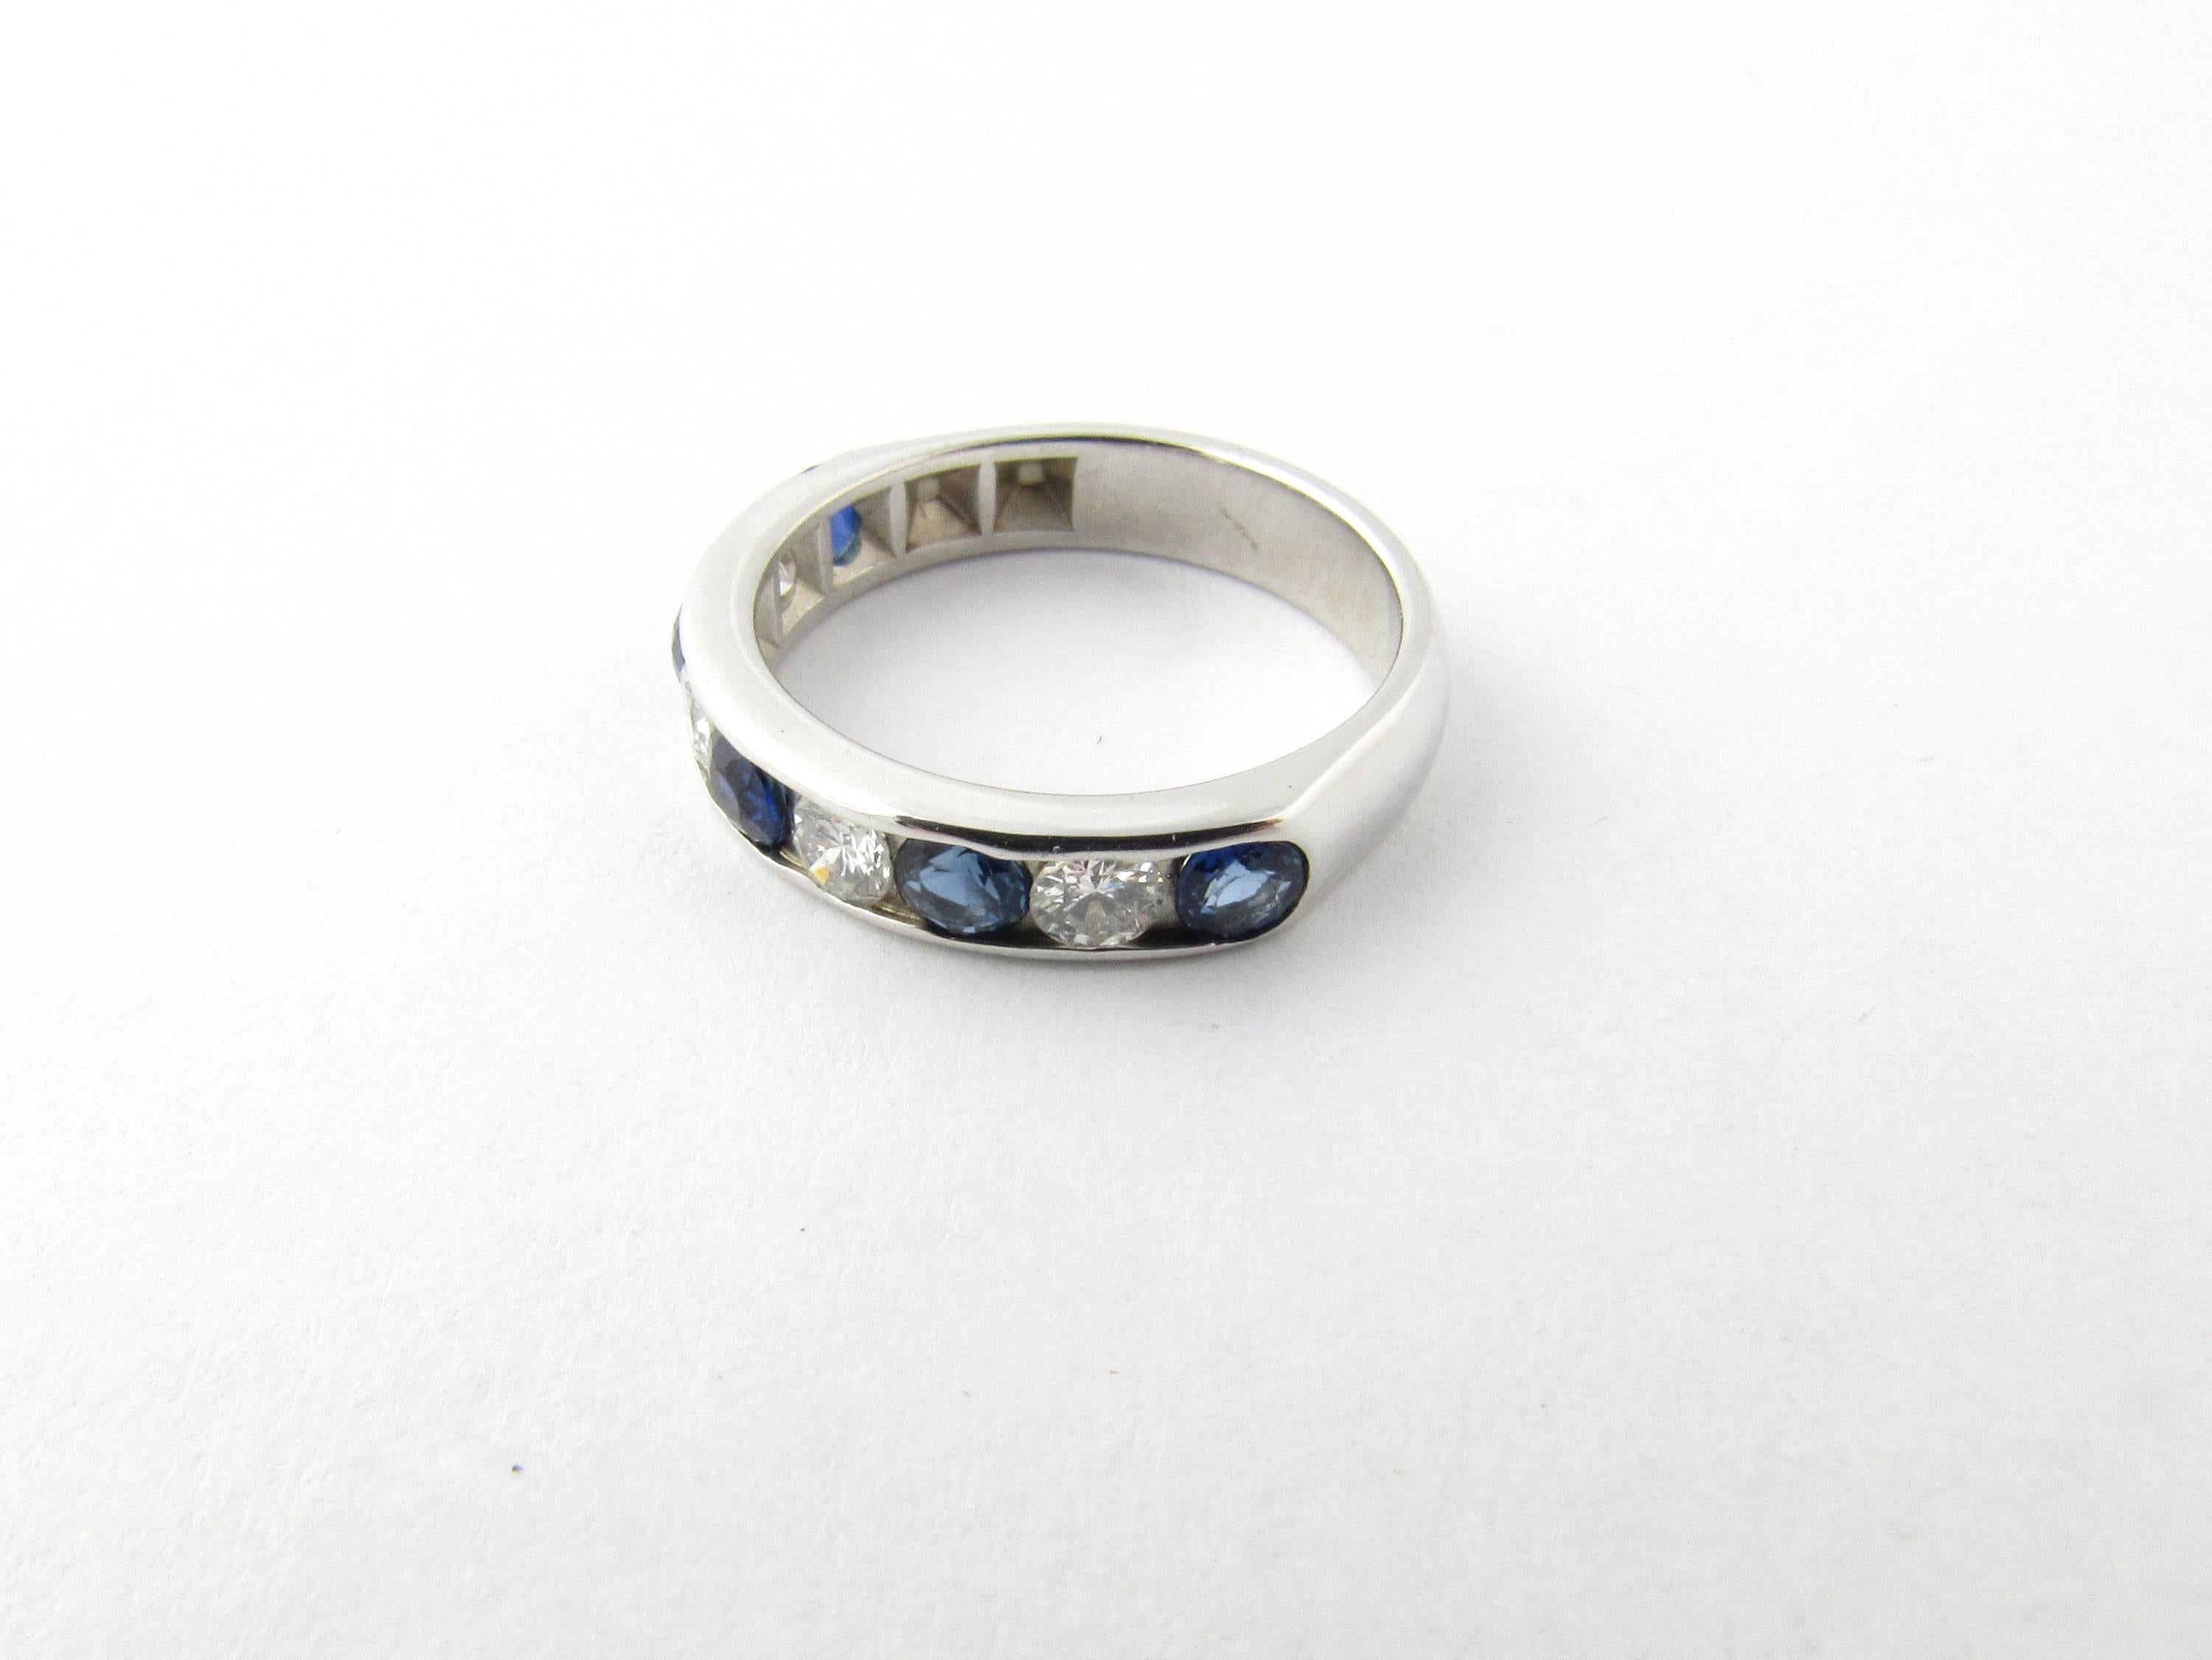 Vintage 14 Karat White Gold Sapphire and Diamond Wedding Band Size 3.75- 
This stunning band features four round sapphires and four round brilliant cut diamonds set in classic 14K white gold. Shank measures 3.5 mm. 
Approximate total diamond weight: